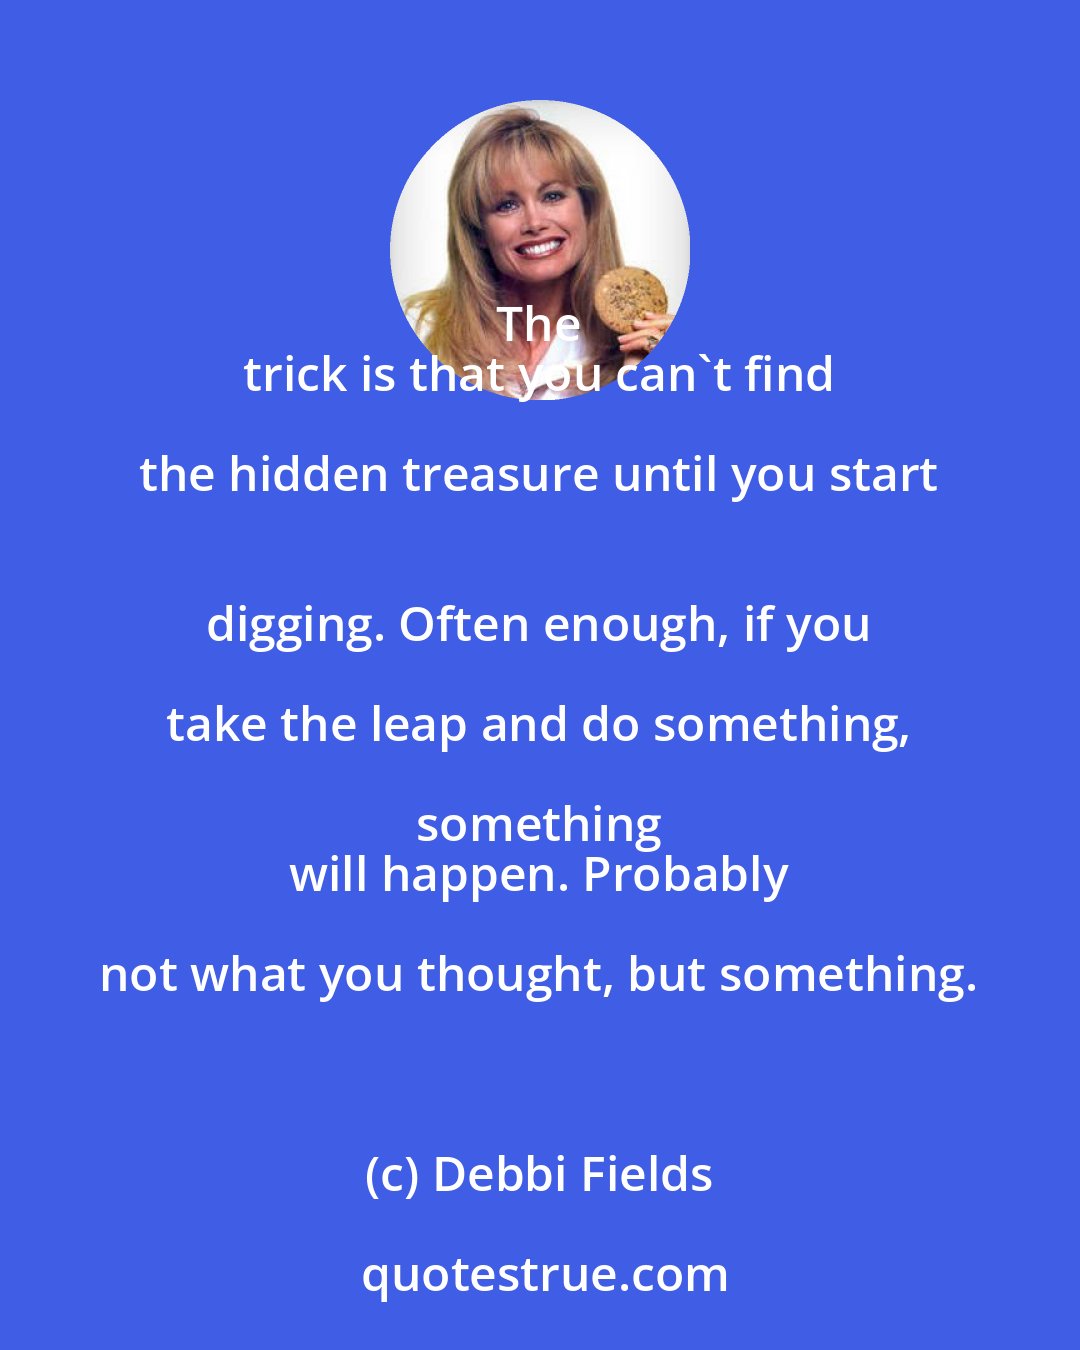 Debbi Fields: The 
 trick is that you can't find the hidden treasure until you start 
 digging. Often enough, if you take the leap and do something, something 
 will happen. Probably not what you thought, but something.